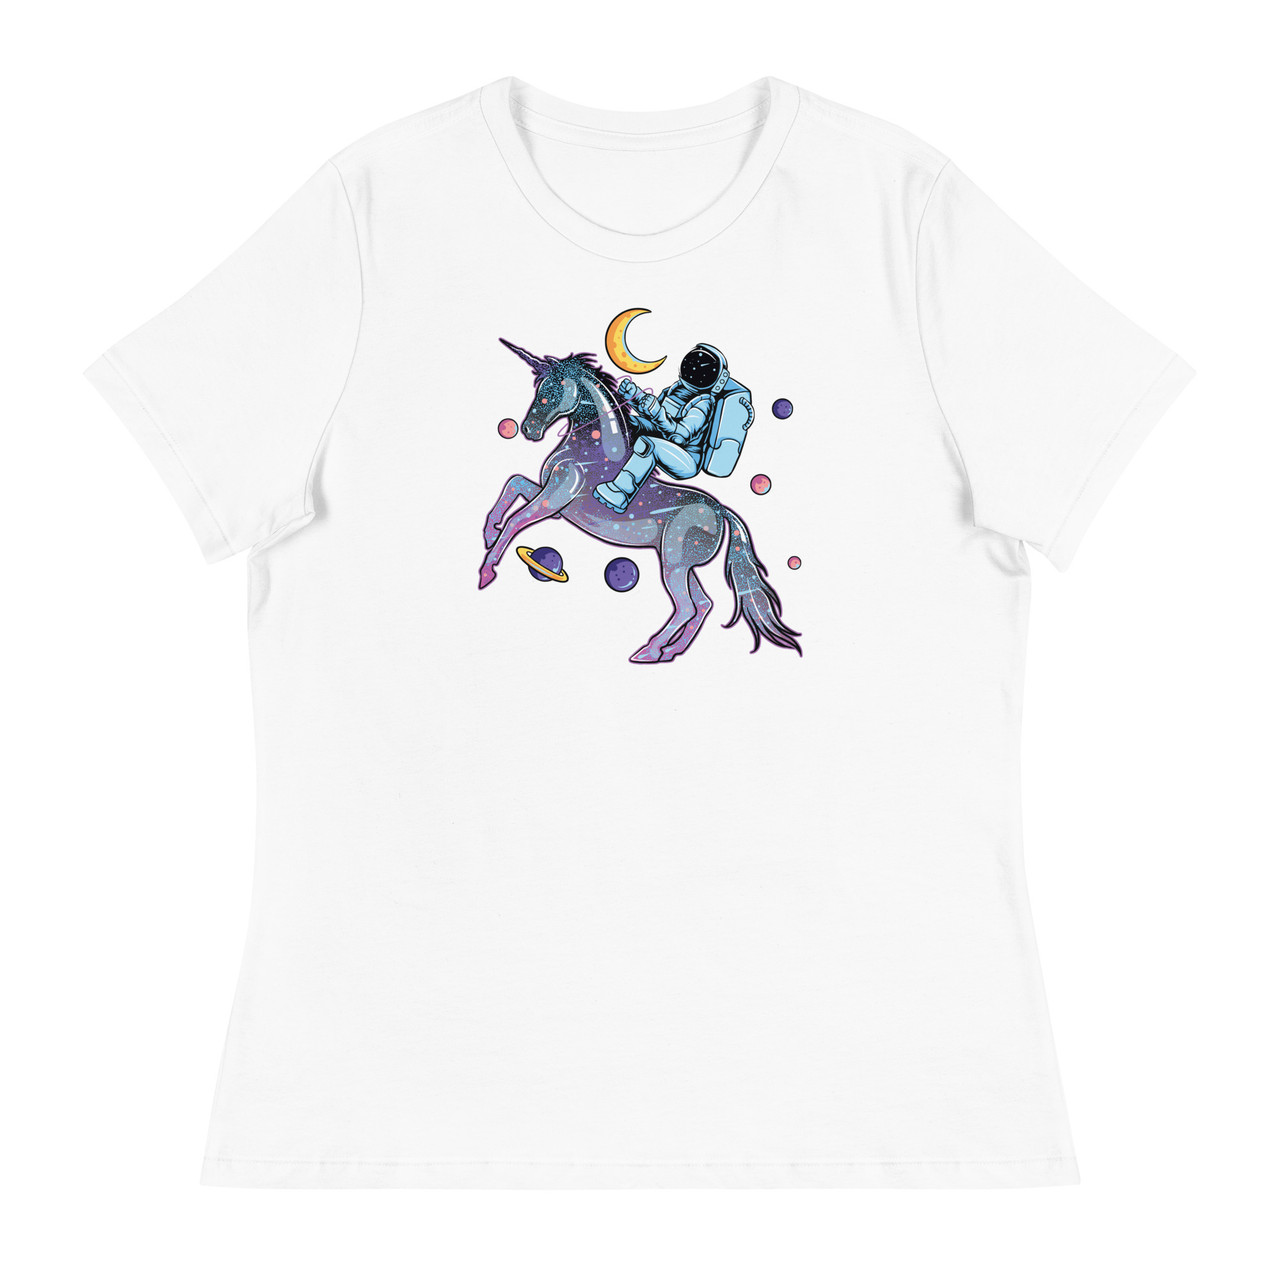 Space Unicorn Women's Relaxed T-Shirt - Bella + Canvas 6400 